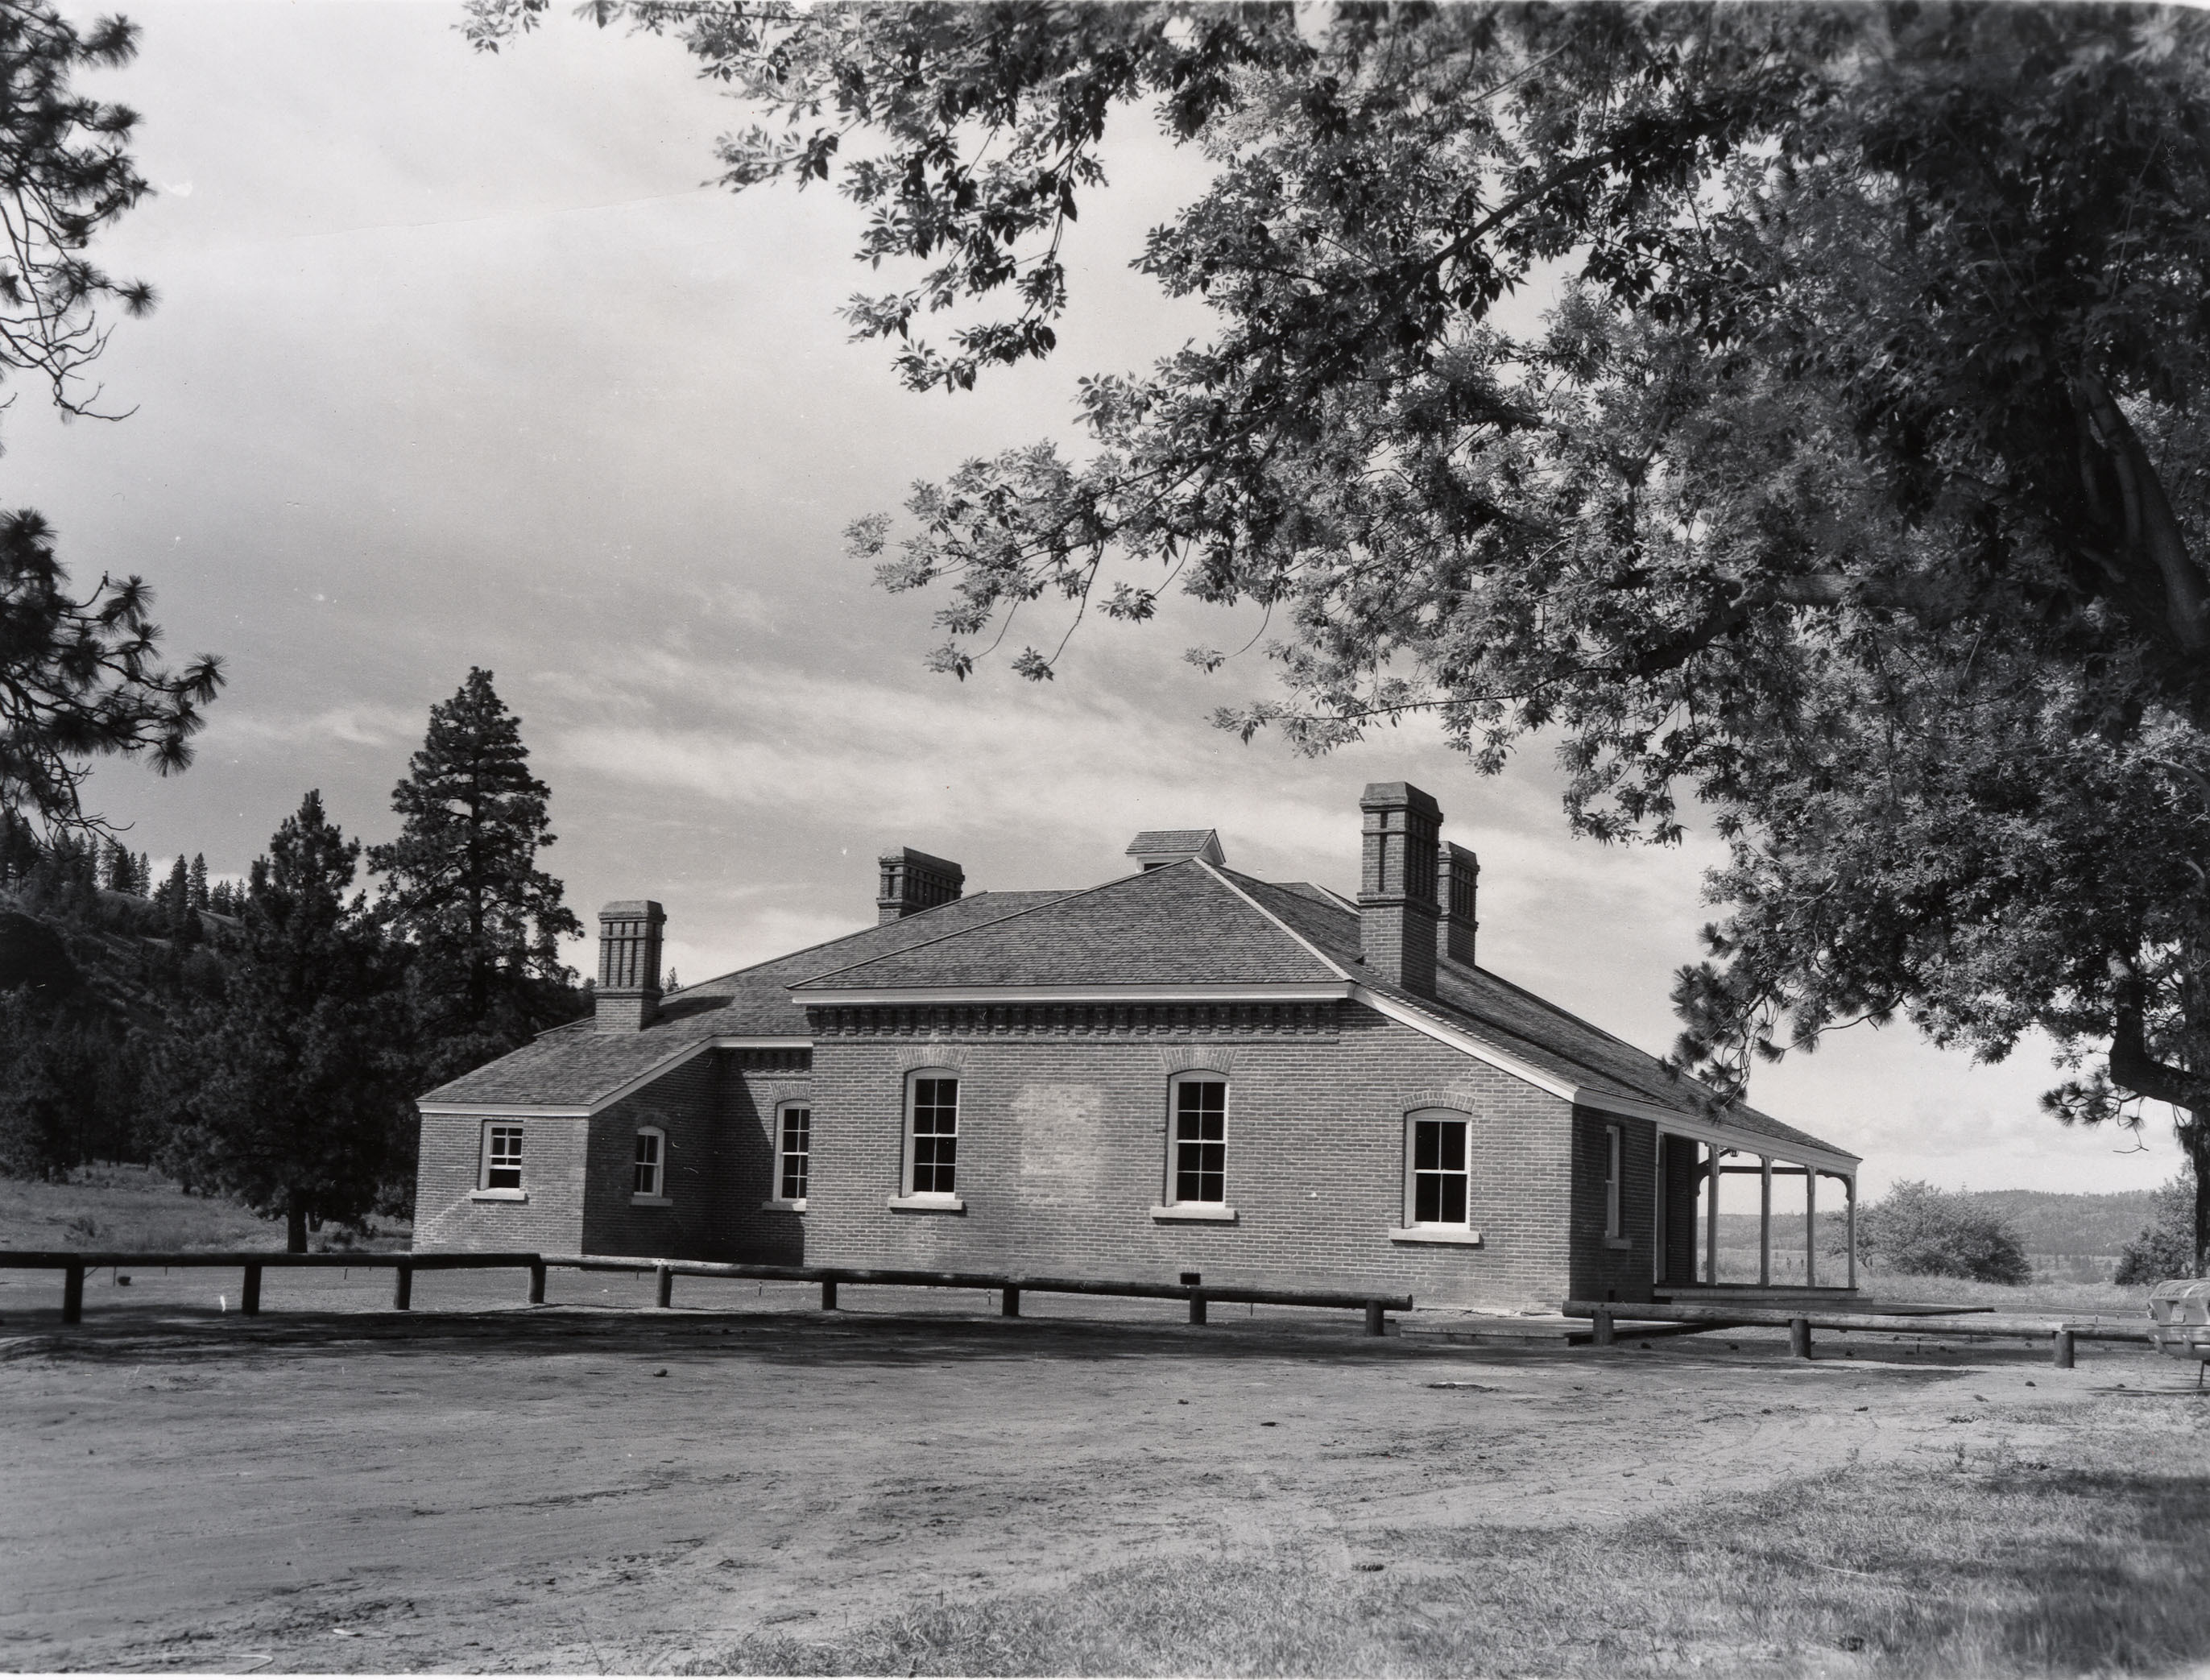 Black and white photograph of a single story brick building.